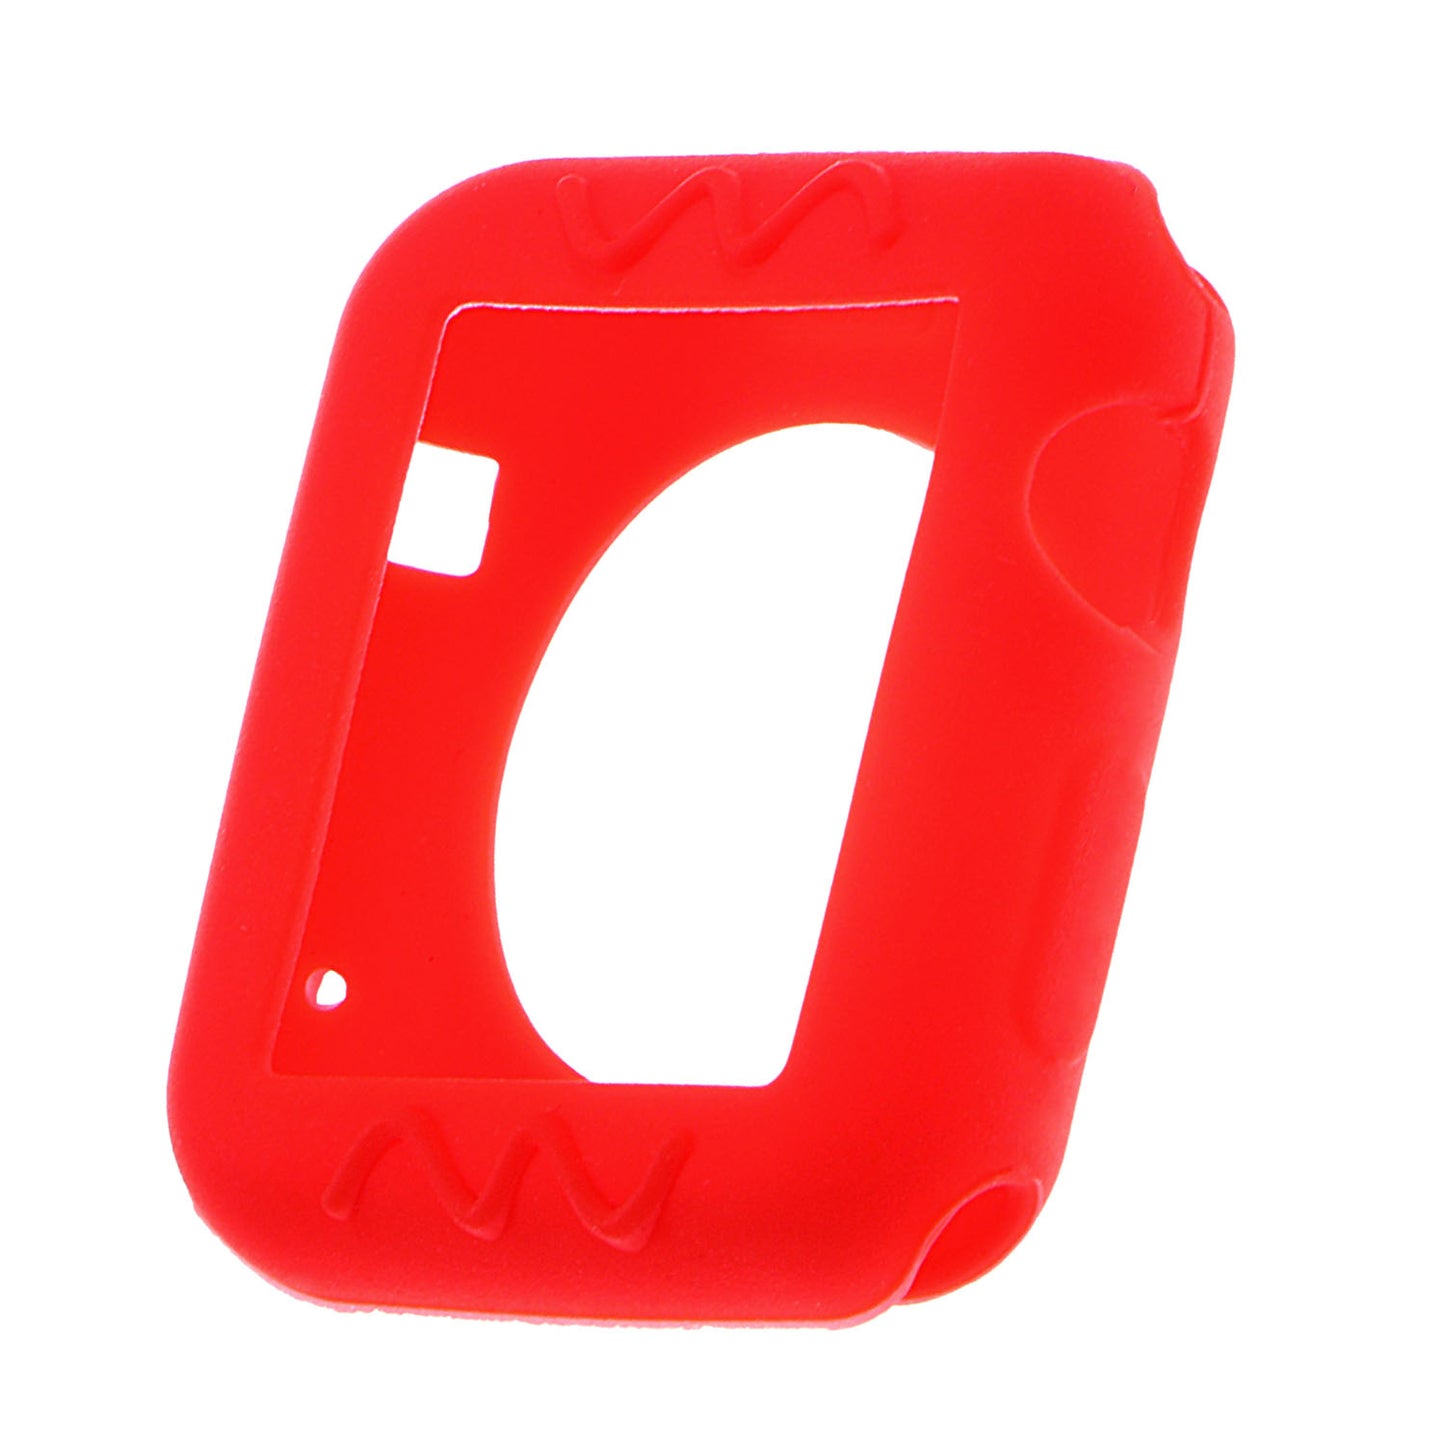 Rubber Protective Case for Apple Watch Series 1/2/3